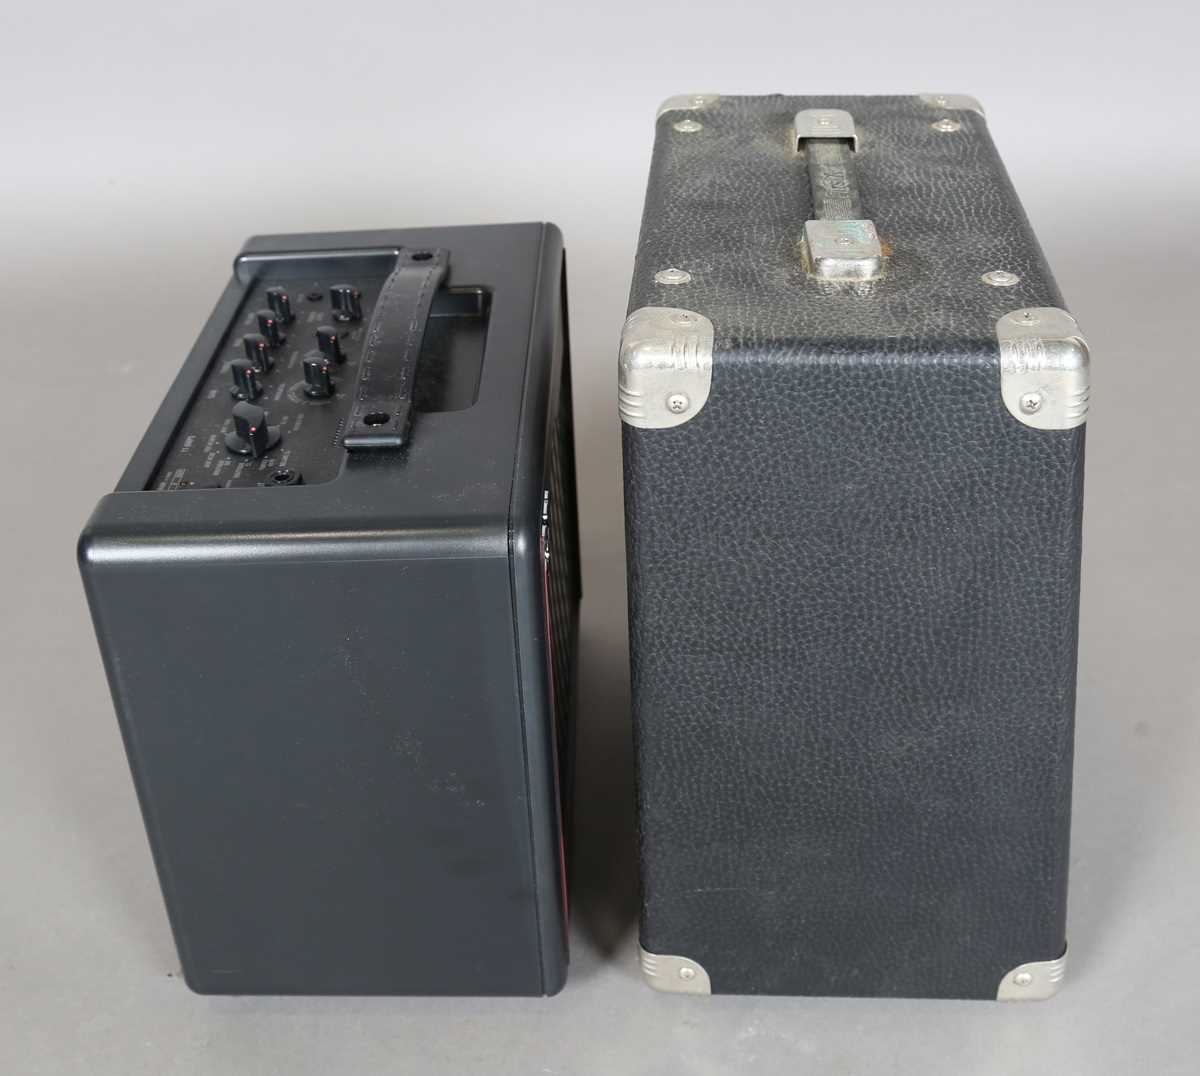 A First Act MA215 bass amplifier, width 33cm, and a Vox VX-1 modelling guitar amplifier. - Image 6 of 10